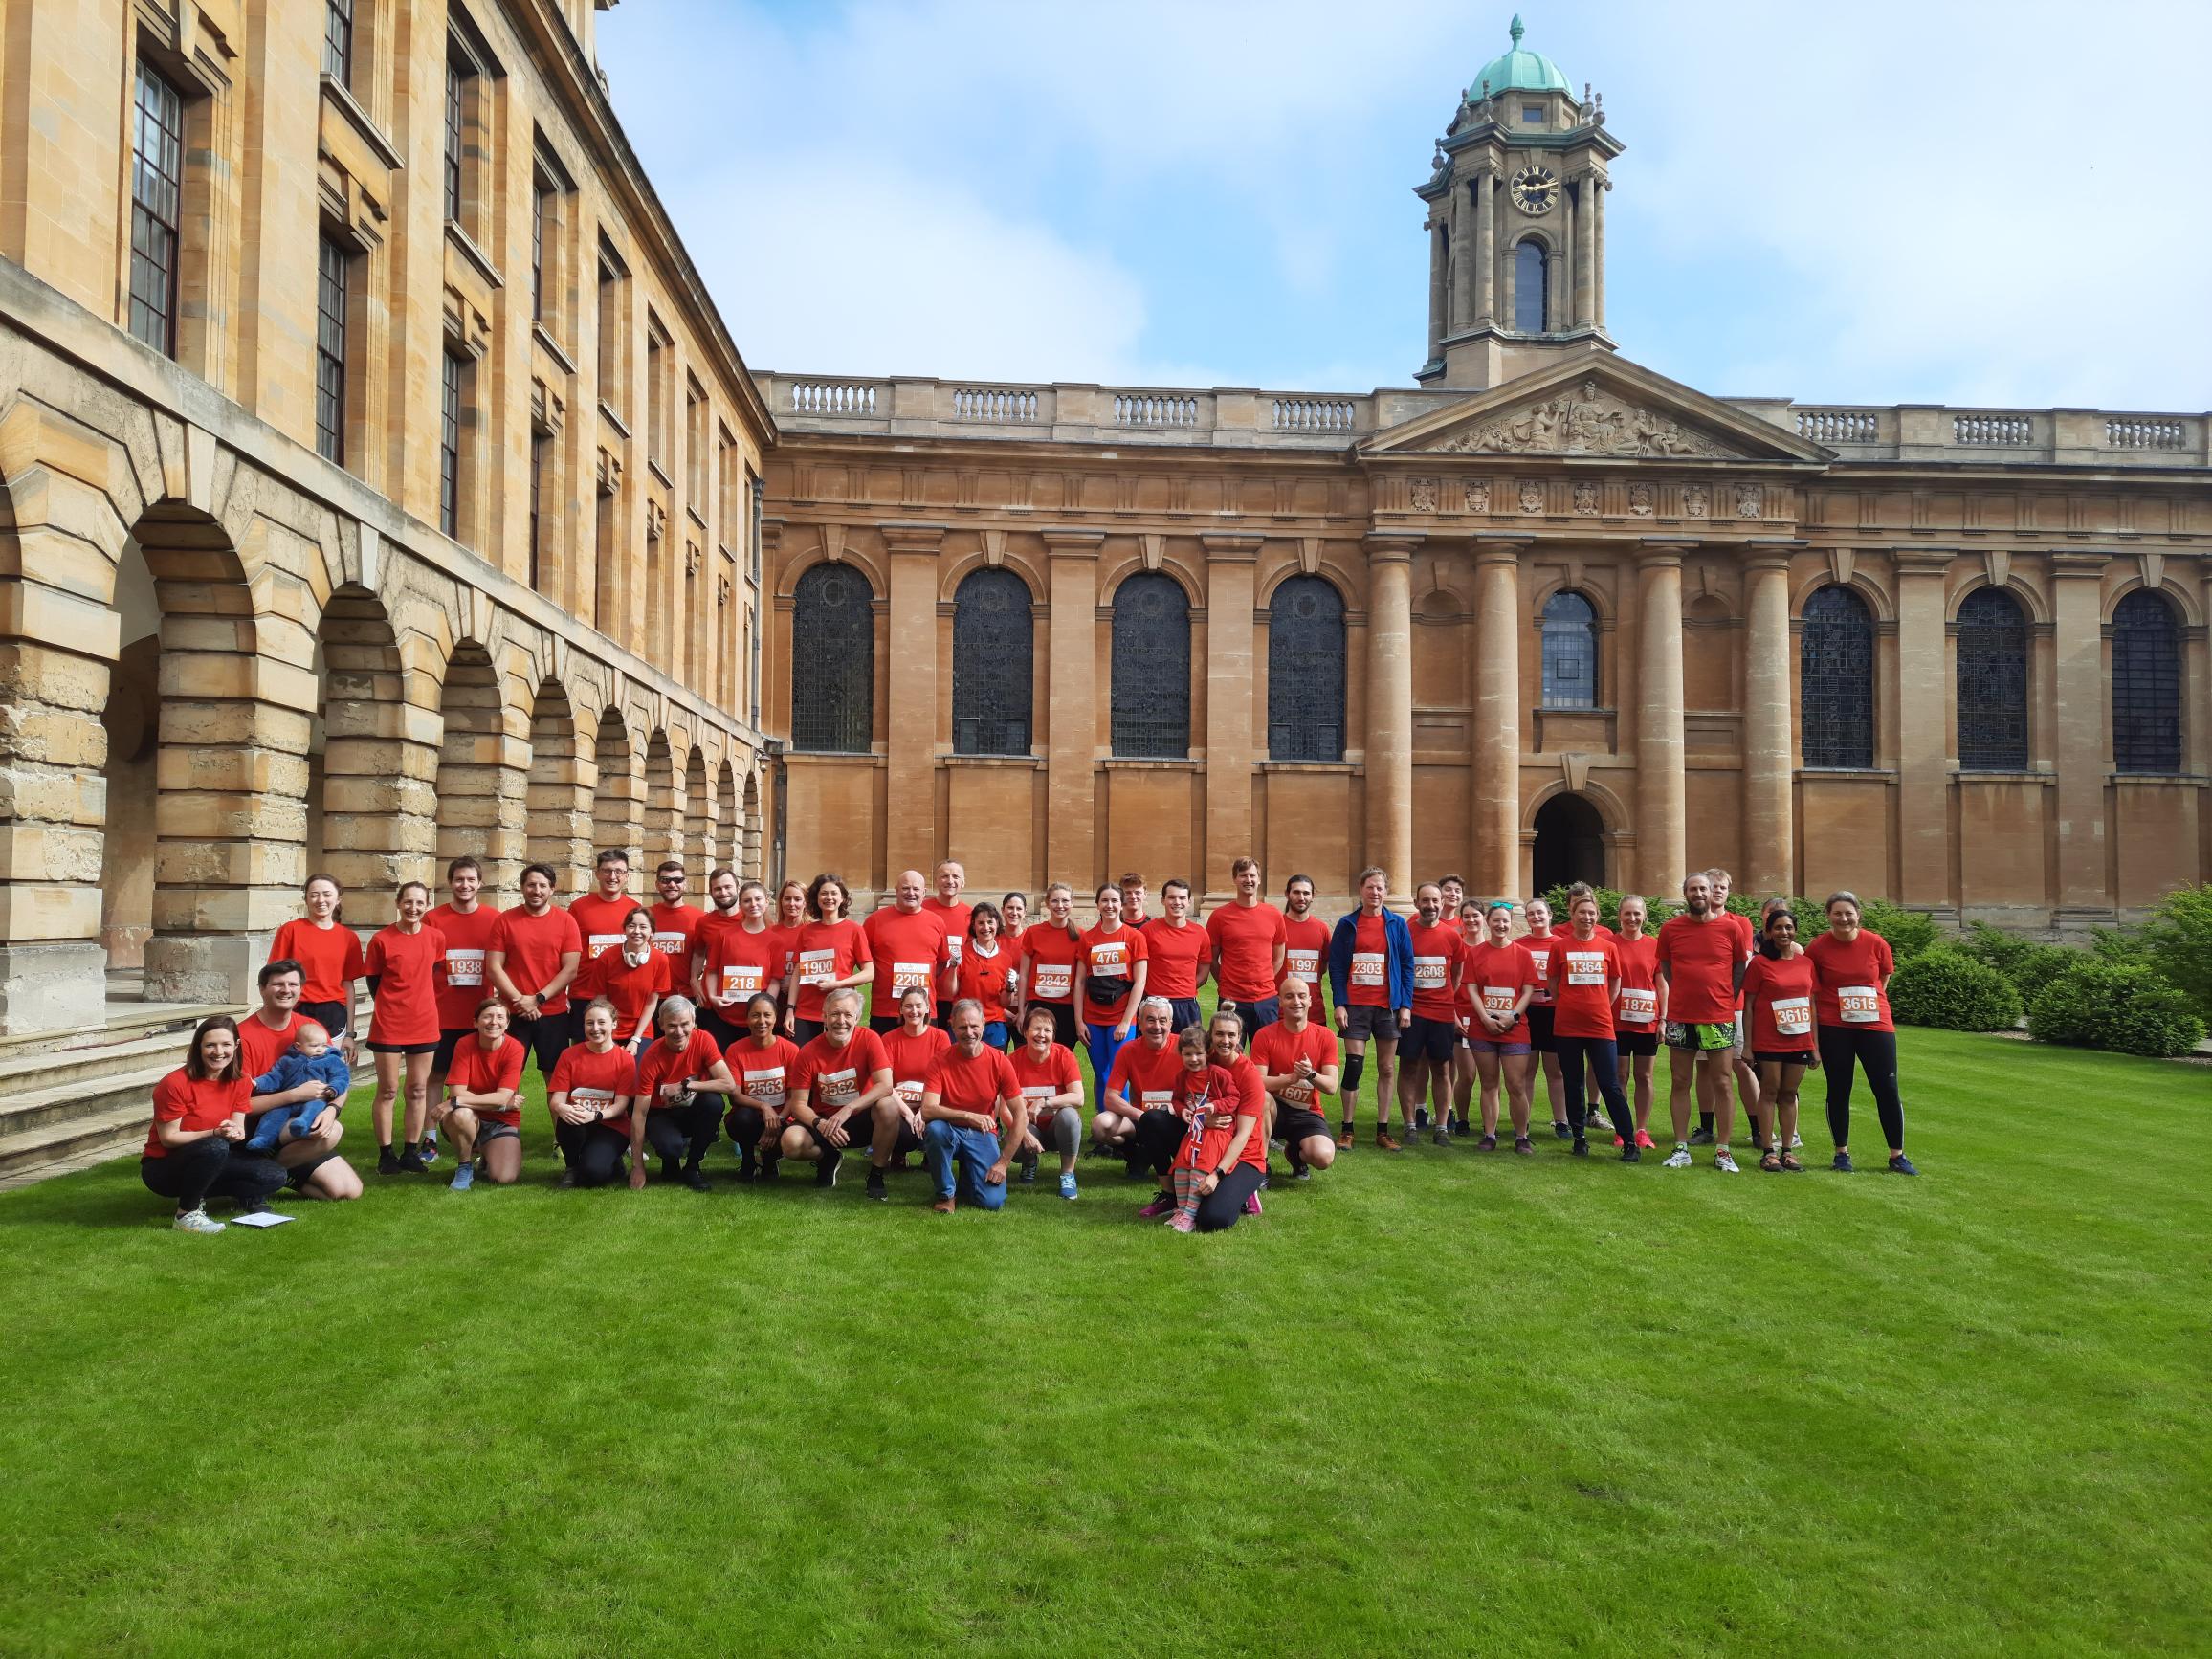 The College town and gown team in 2023 pictured in Front Quad wearing red team t-shirts